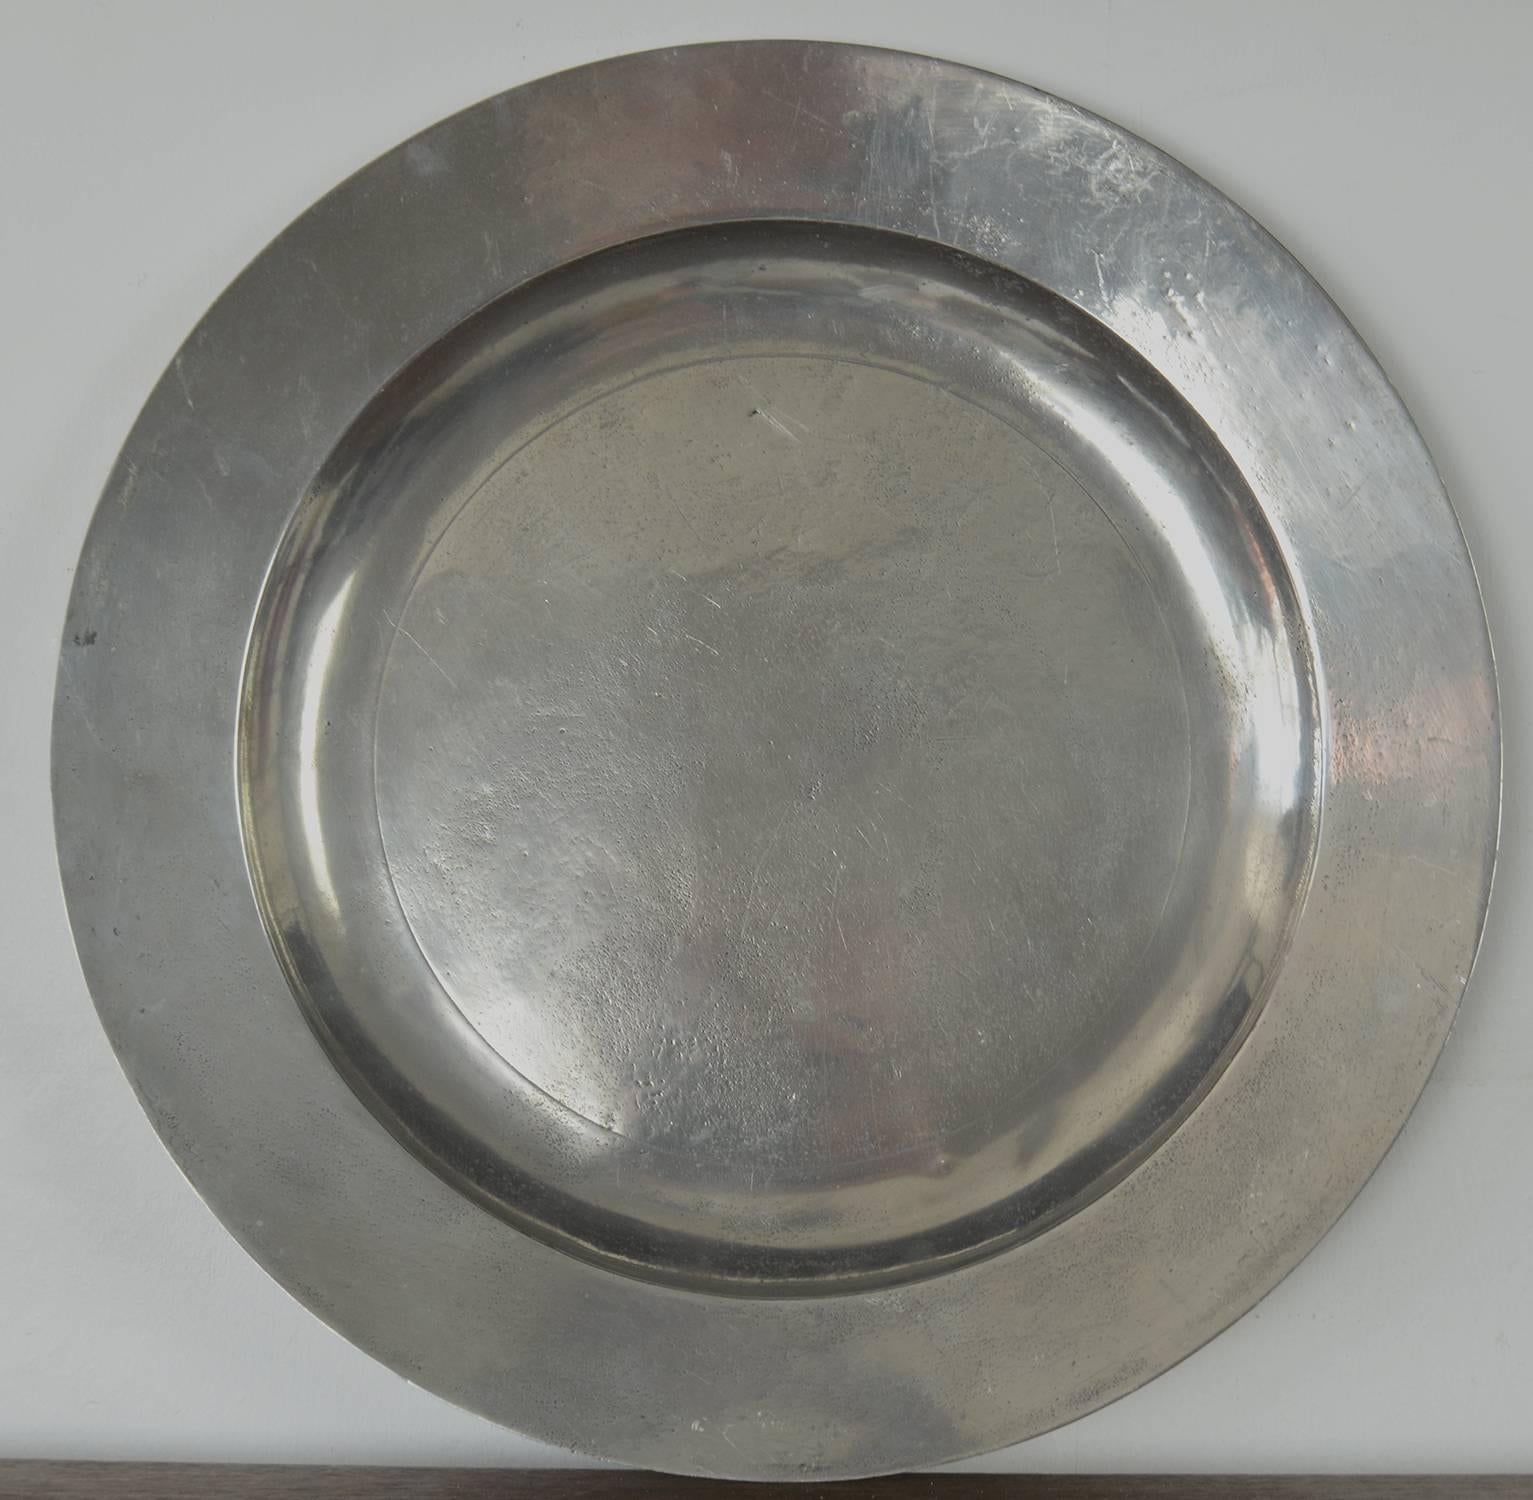 Wonderful group of 18th century polished English pewter chargers.

It gives them an almost Industrial look.

Useful as table coasters, trays or wall decorations.

They have been professionally polished front and back.

When polished pewter